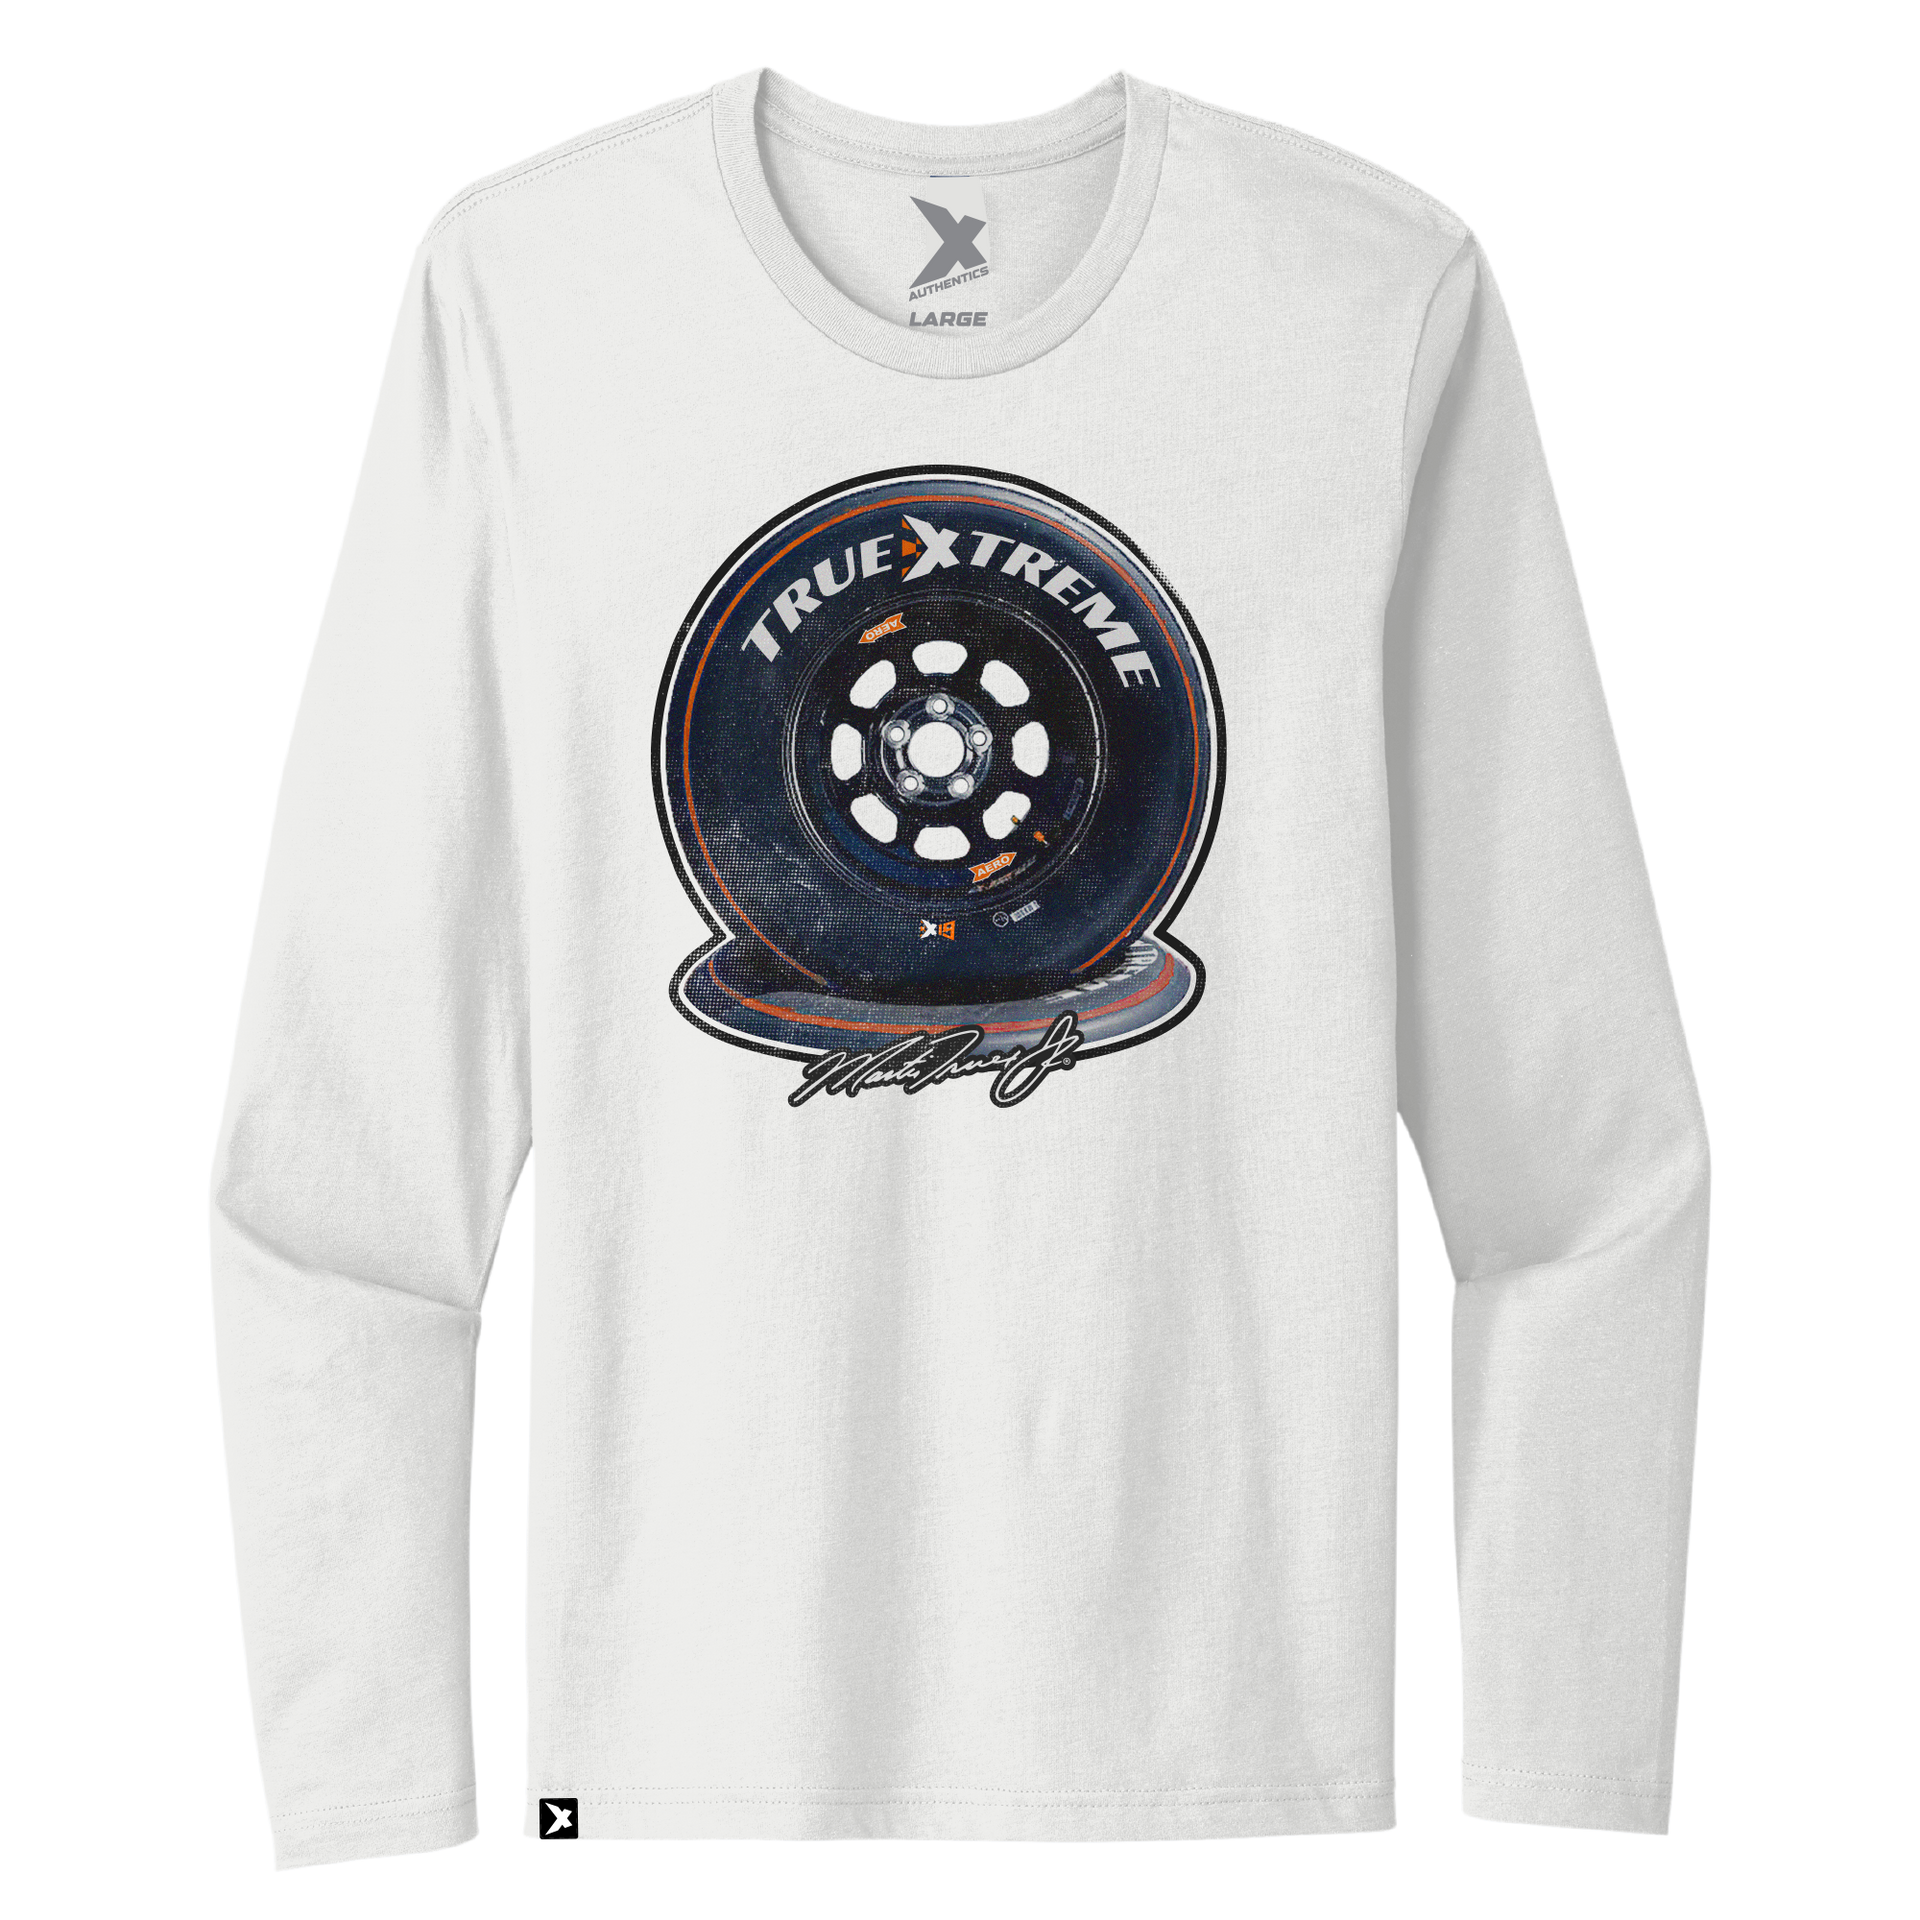 TrueXtreme Outdoors Motor Division Retro Rubber Long Sleeve Tee